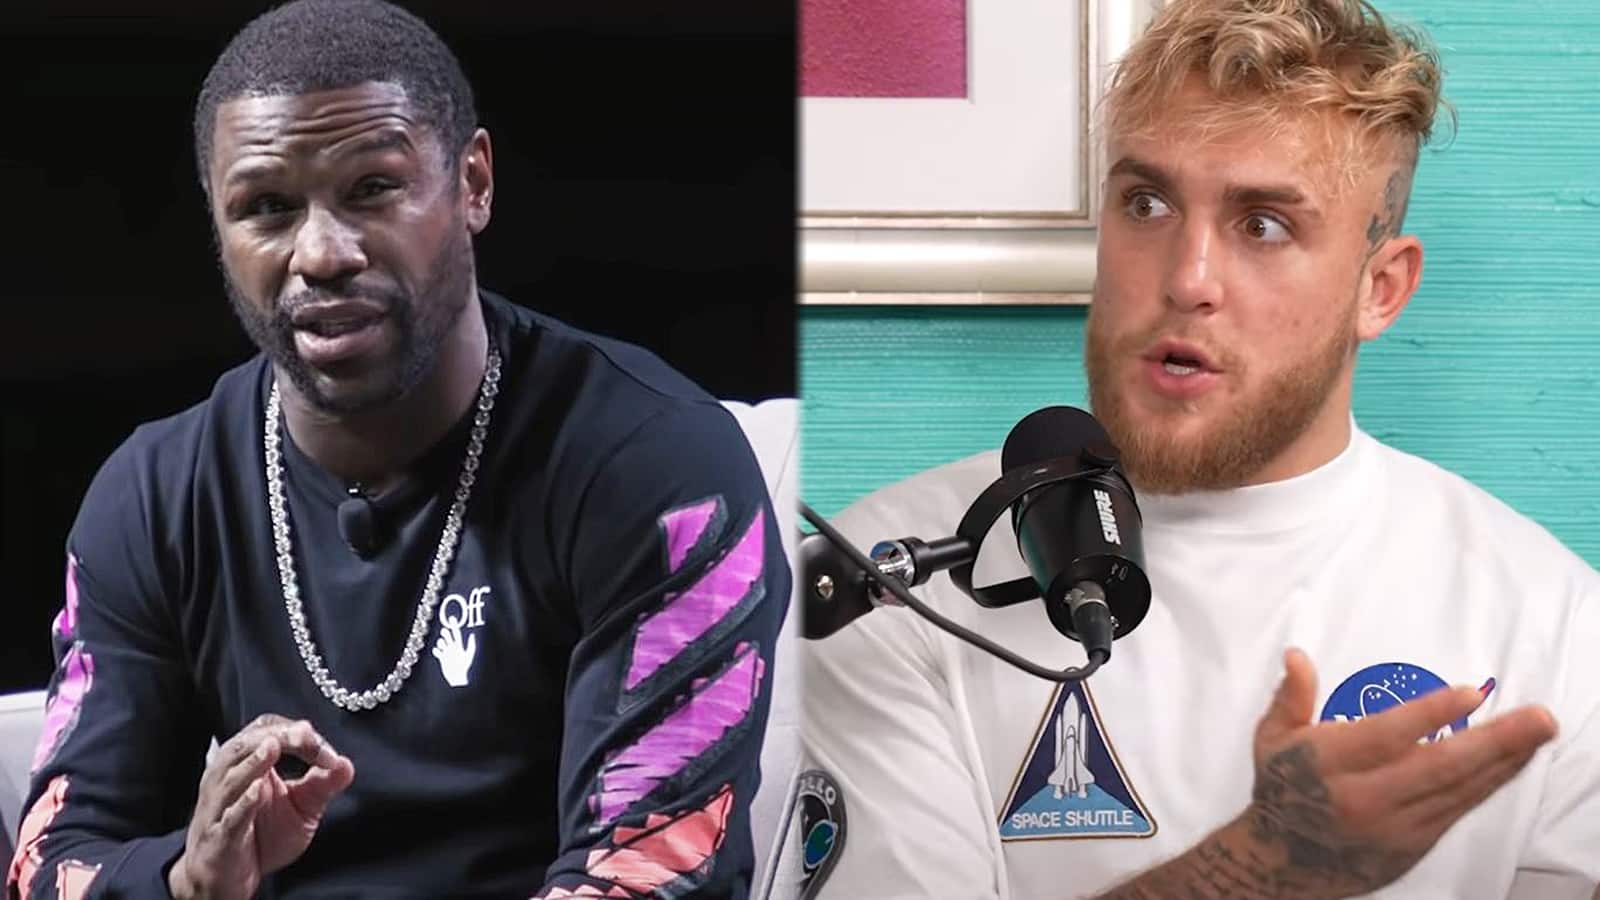 Jake Paul claims Mayweather tried to have him offed